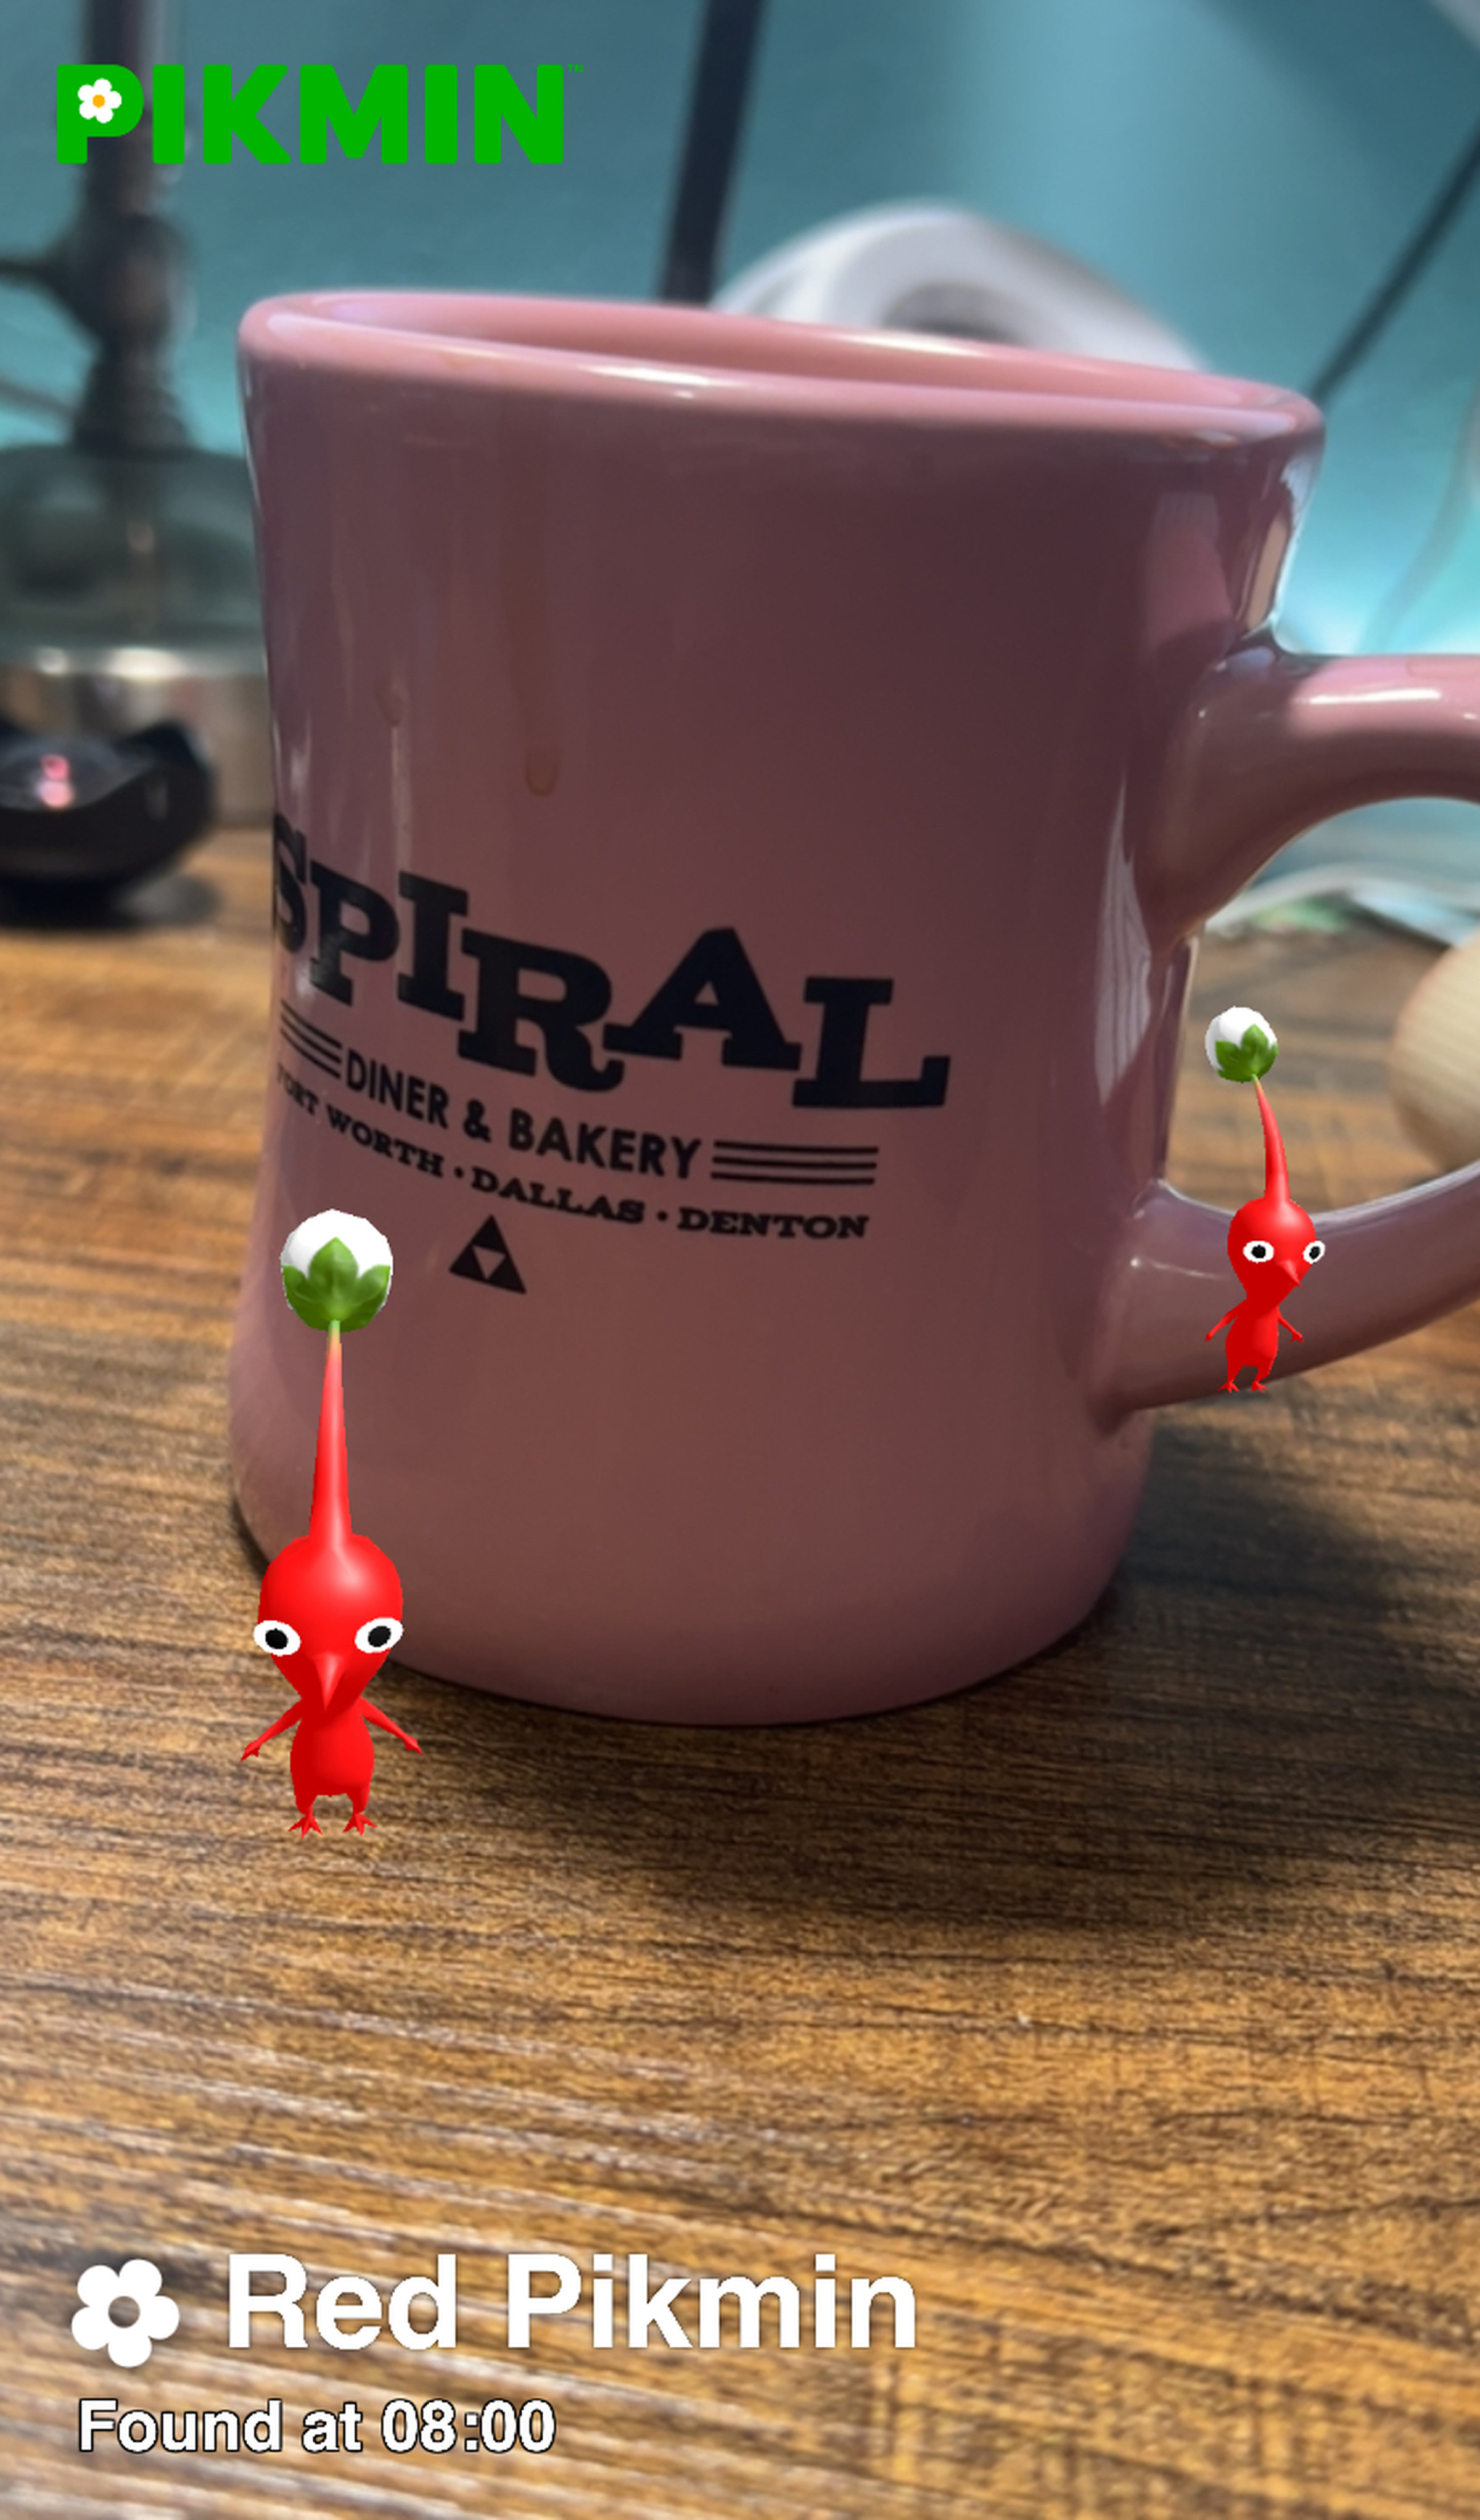 A picture of two pikmin standing around a pink diner-style coffee mug.